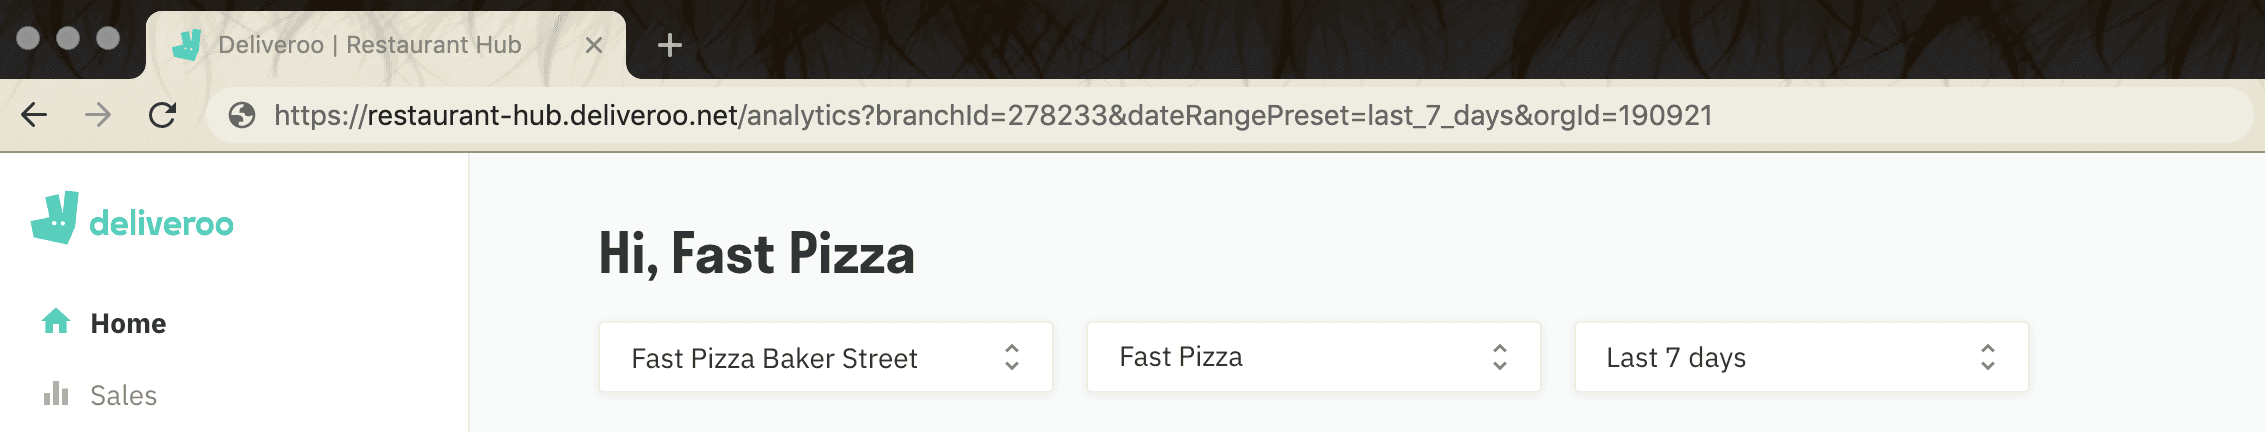 Deliveroo Restaurant ID in the URL of the back office